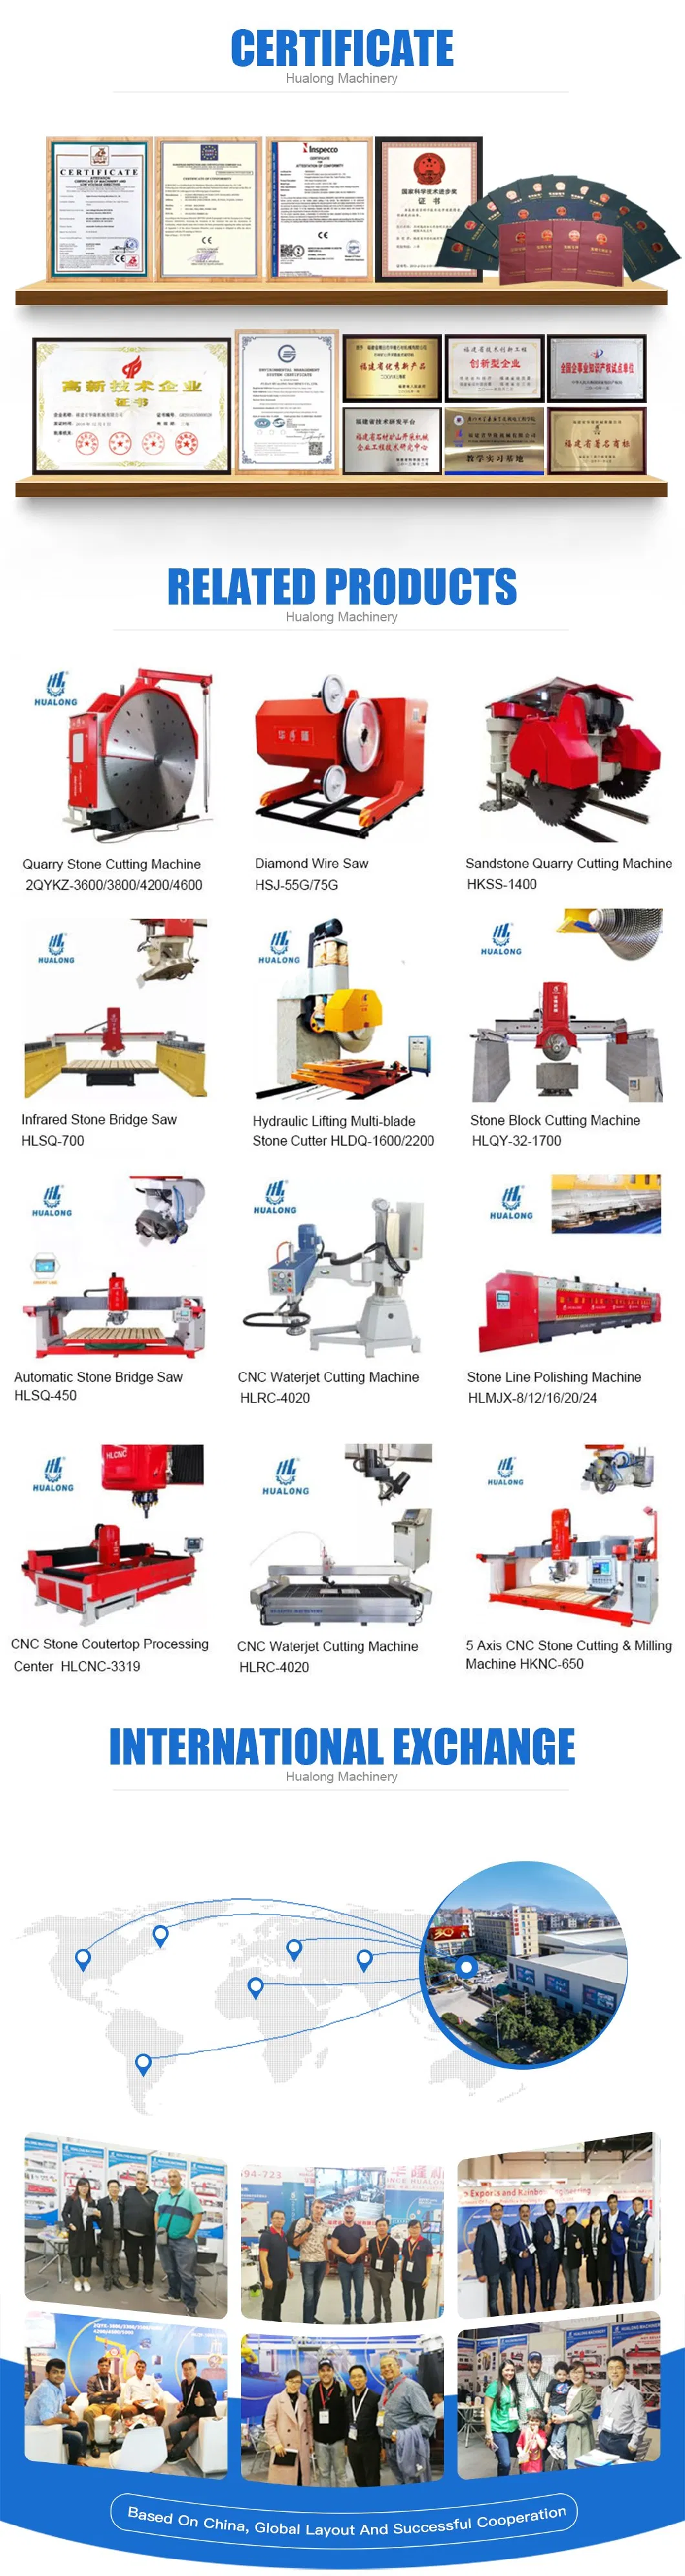 Hualong Machinery Italy Esa System Automatic Program Software Stone Cutting 5 Axis CNC Bridge Saw Machine for Marble, Kitchen Countertop Making in America